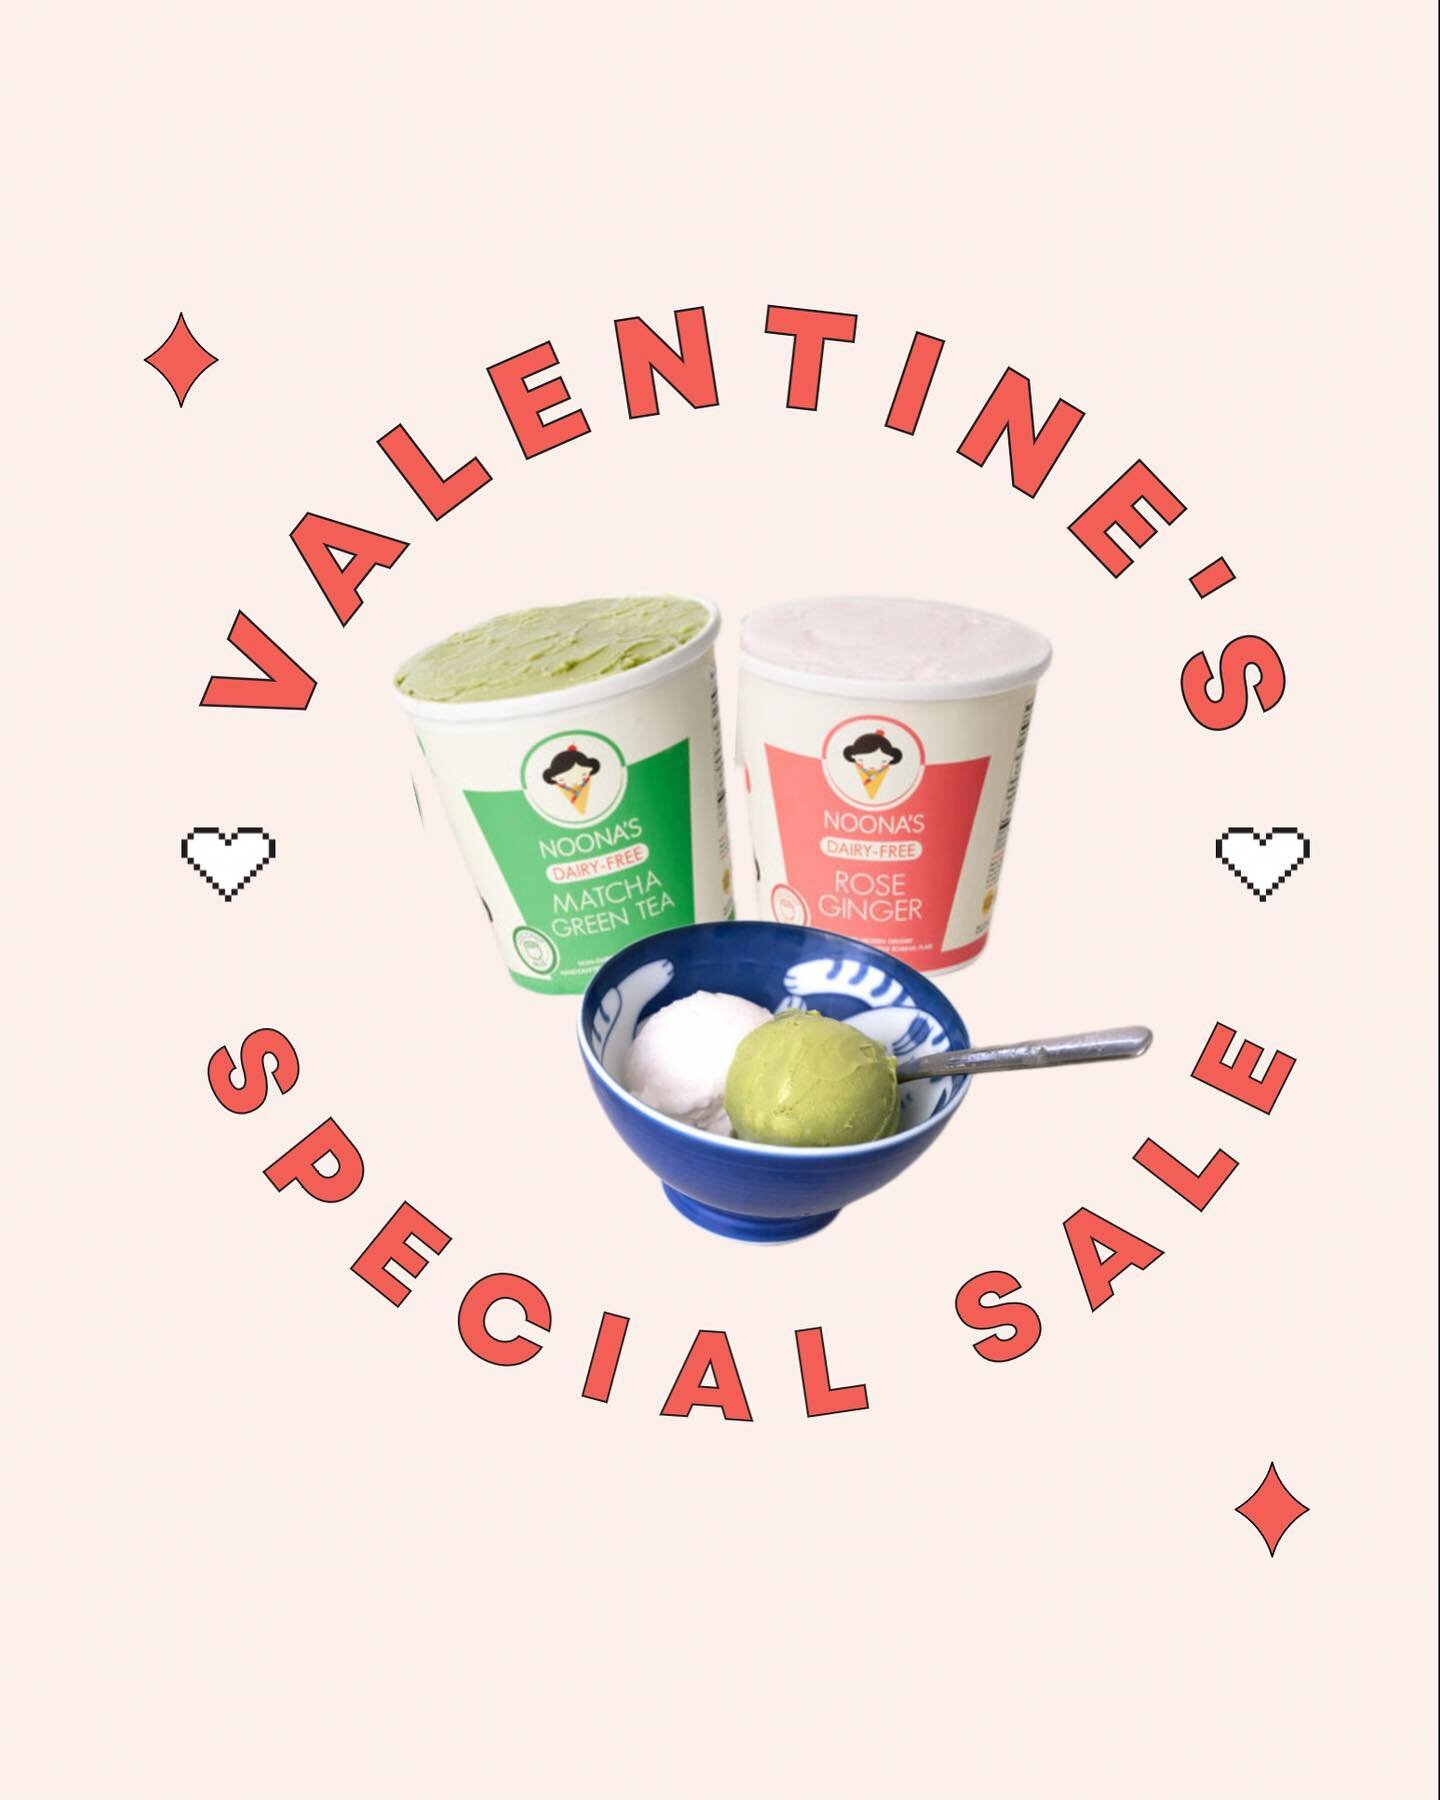 In celebration of upcoming Valentine&rsquo;s Day, we&rsquo;re having a sale for our Vegan Matcha Green Tea and Vegan Rose Ginger flavors. Add it to your cart along with all your other favorite noona flavors. To get in time for V-Day, place your order